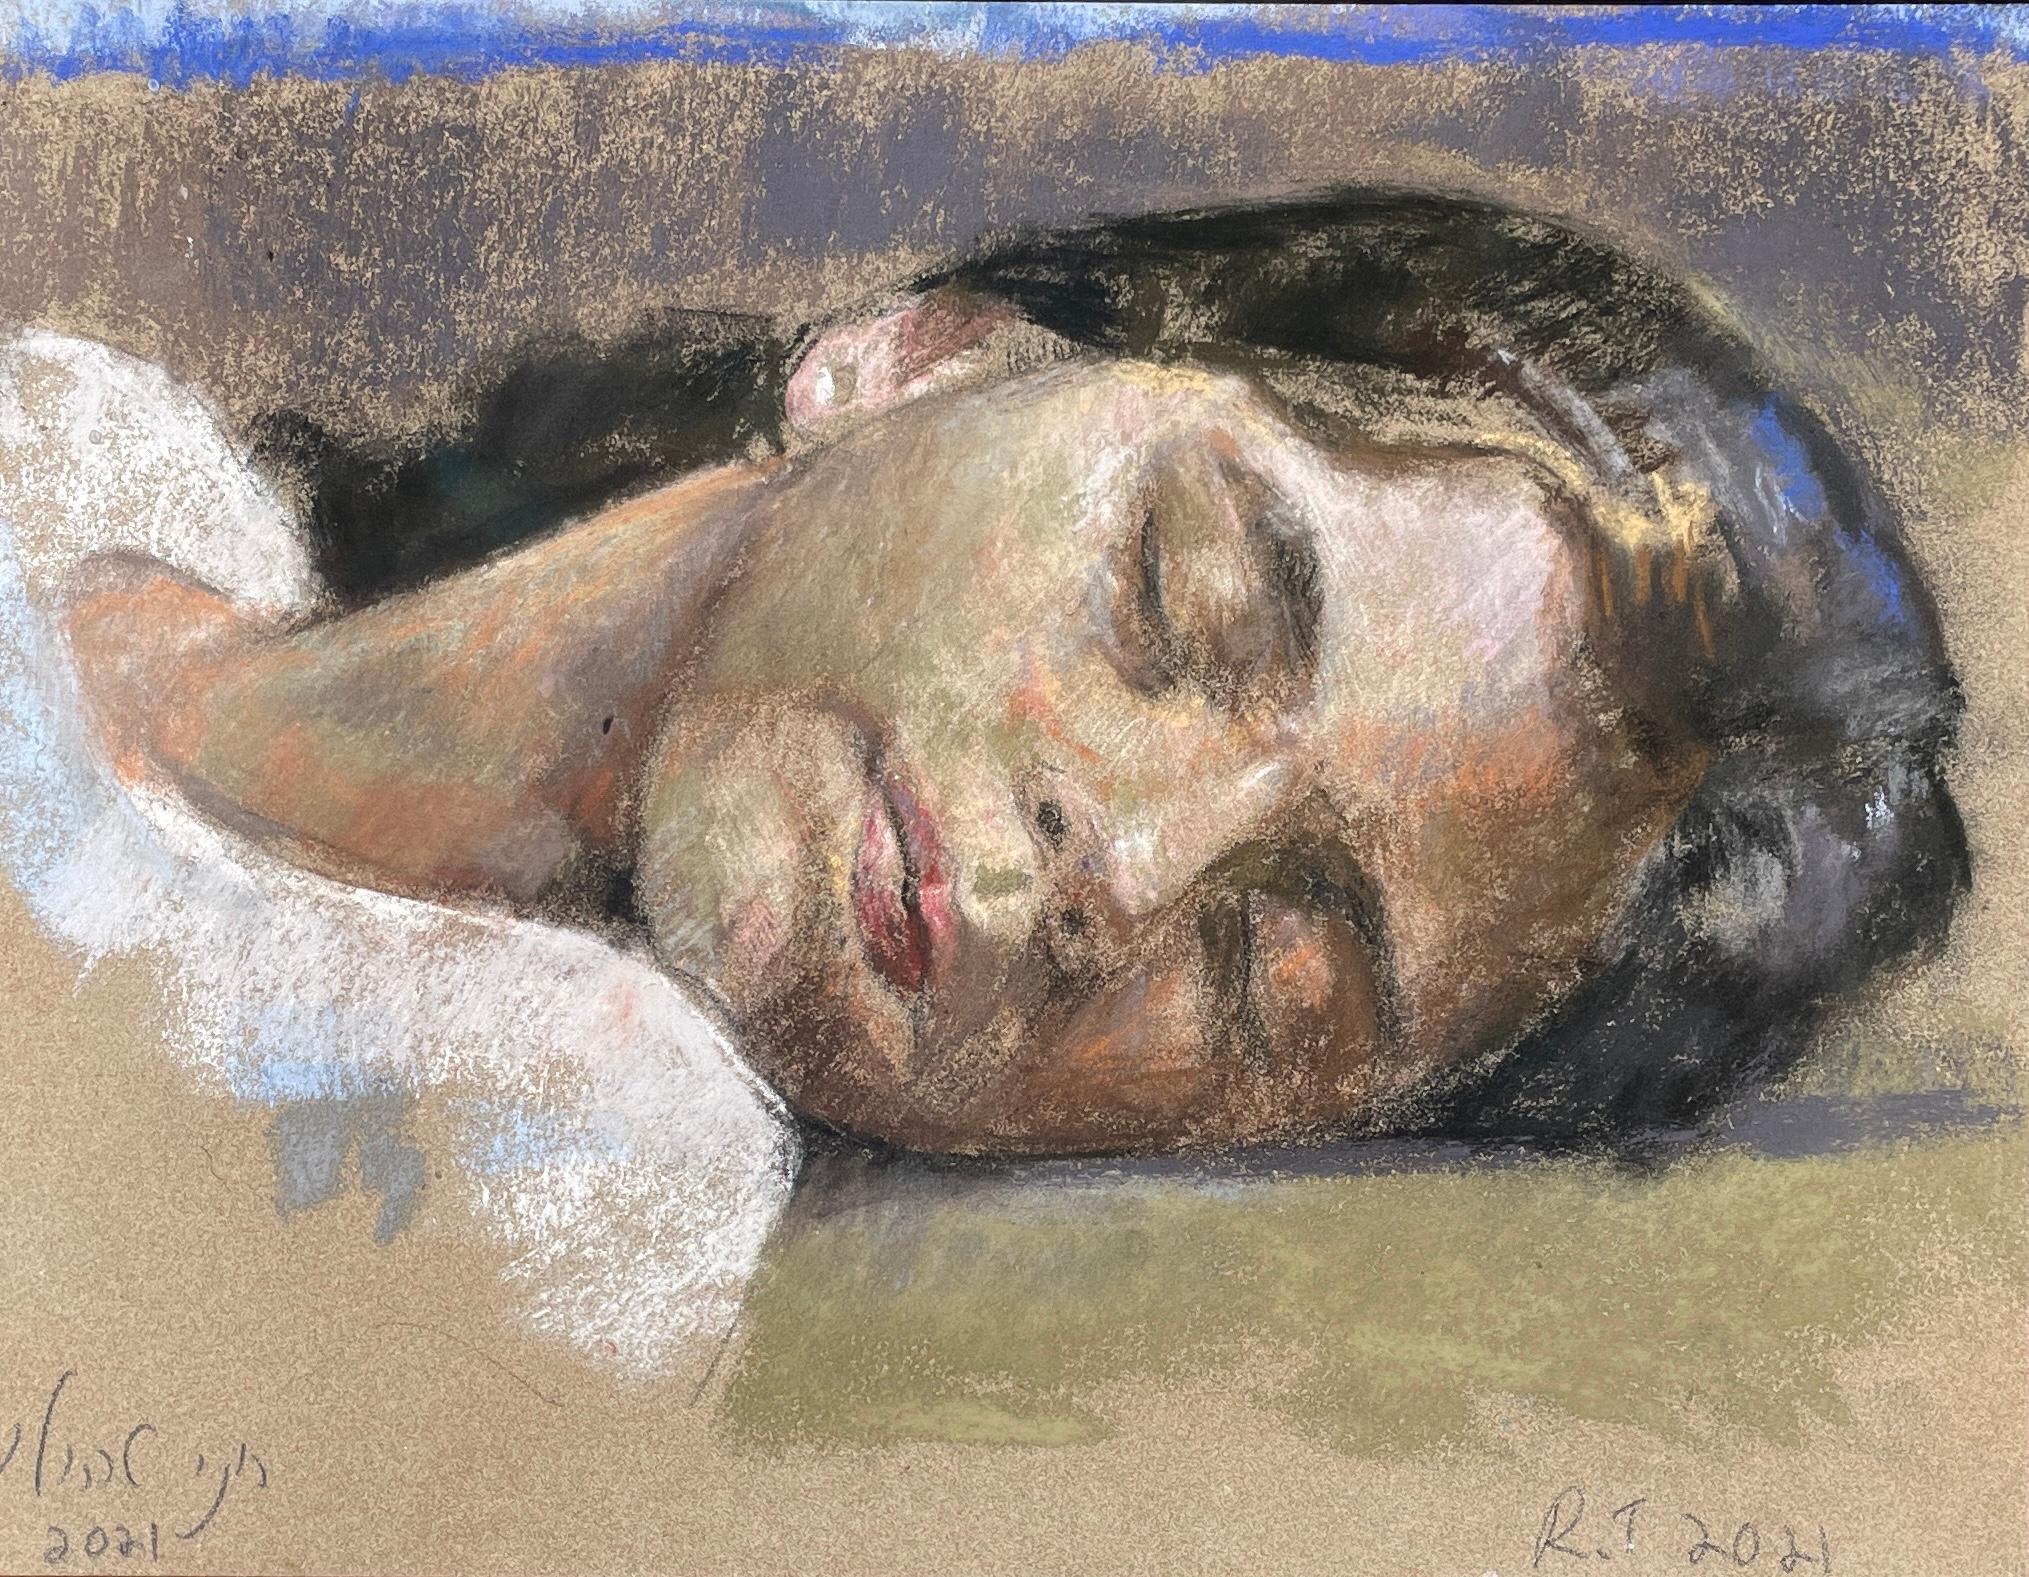 For a piece that offers a serene repose, "Sleep" by Roni Taharlev is an aptly titled oil pastel on paper that captures the quietude of rest. The artwork, sized 15.5" x 18", showcases Taharlev’s fine attention to detail and her ability to evoke